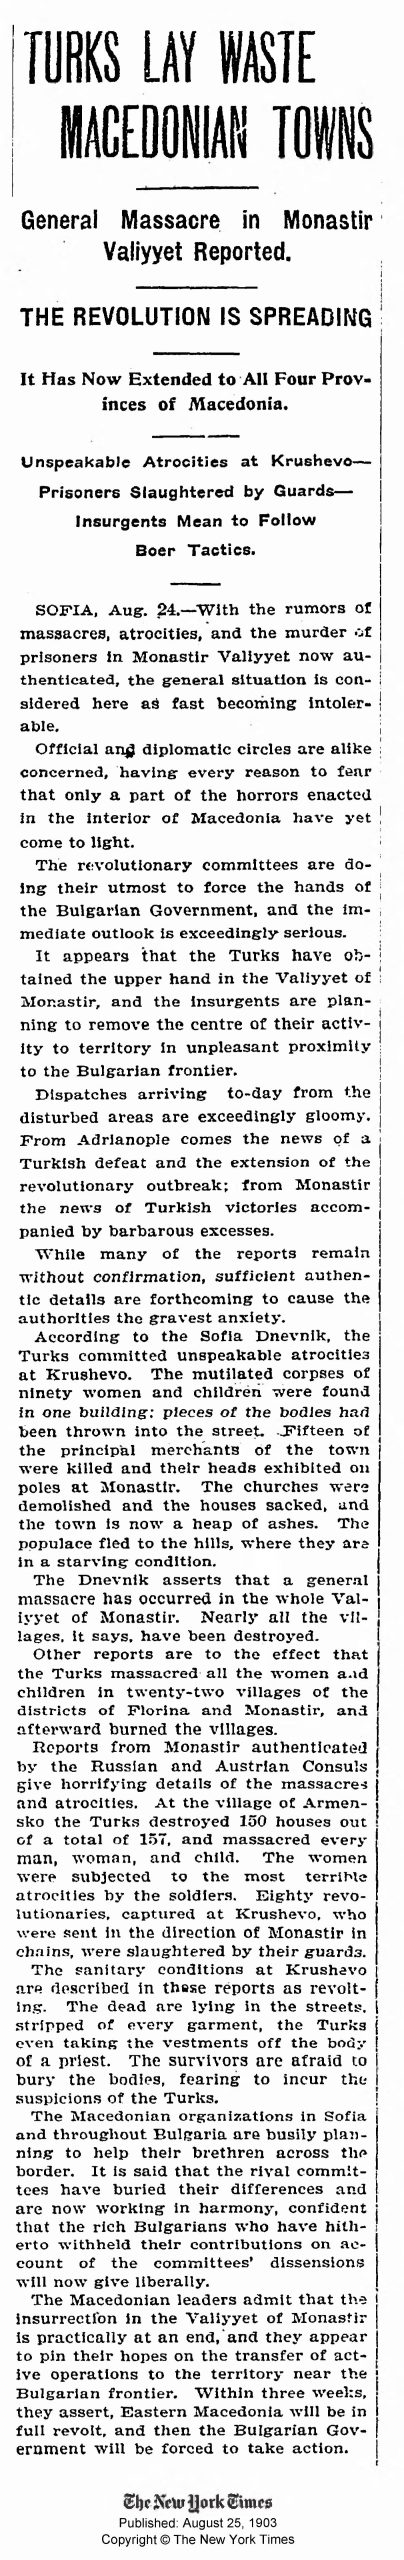 1903.08.25_The New York Times - Turks lay waste to Macedonian towns